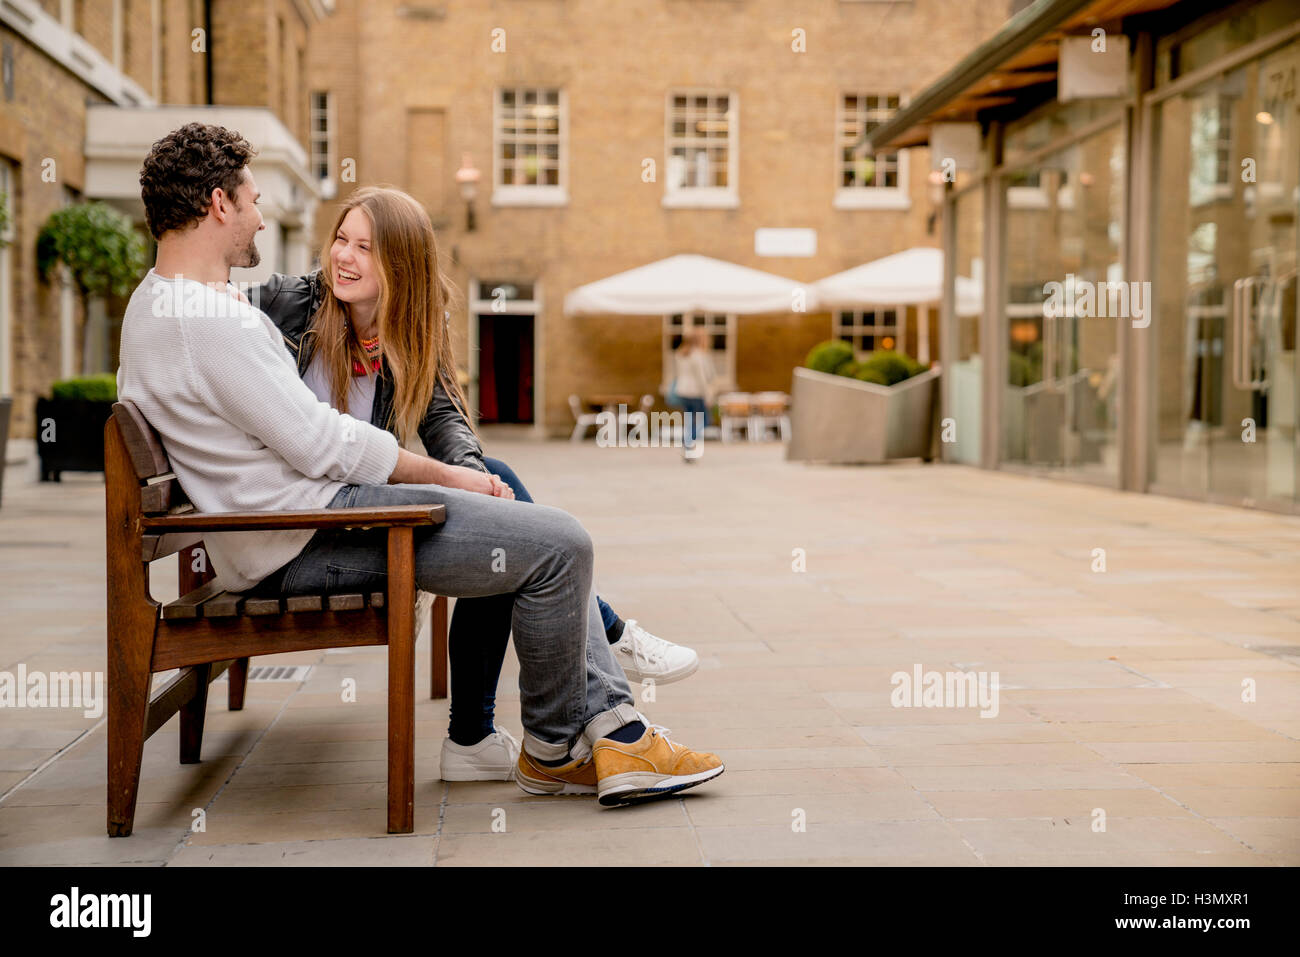 Young couple sitting on bench chatting, Kings Road, London, UK Stock Photo